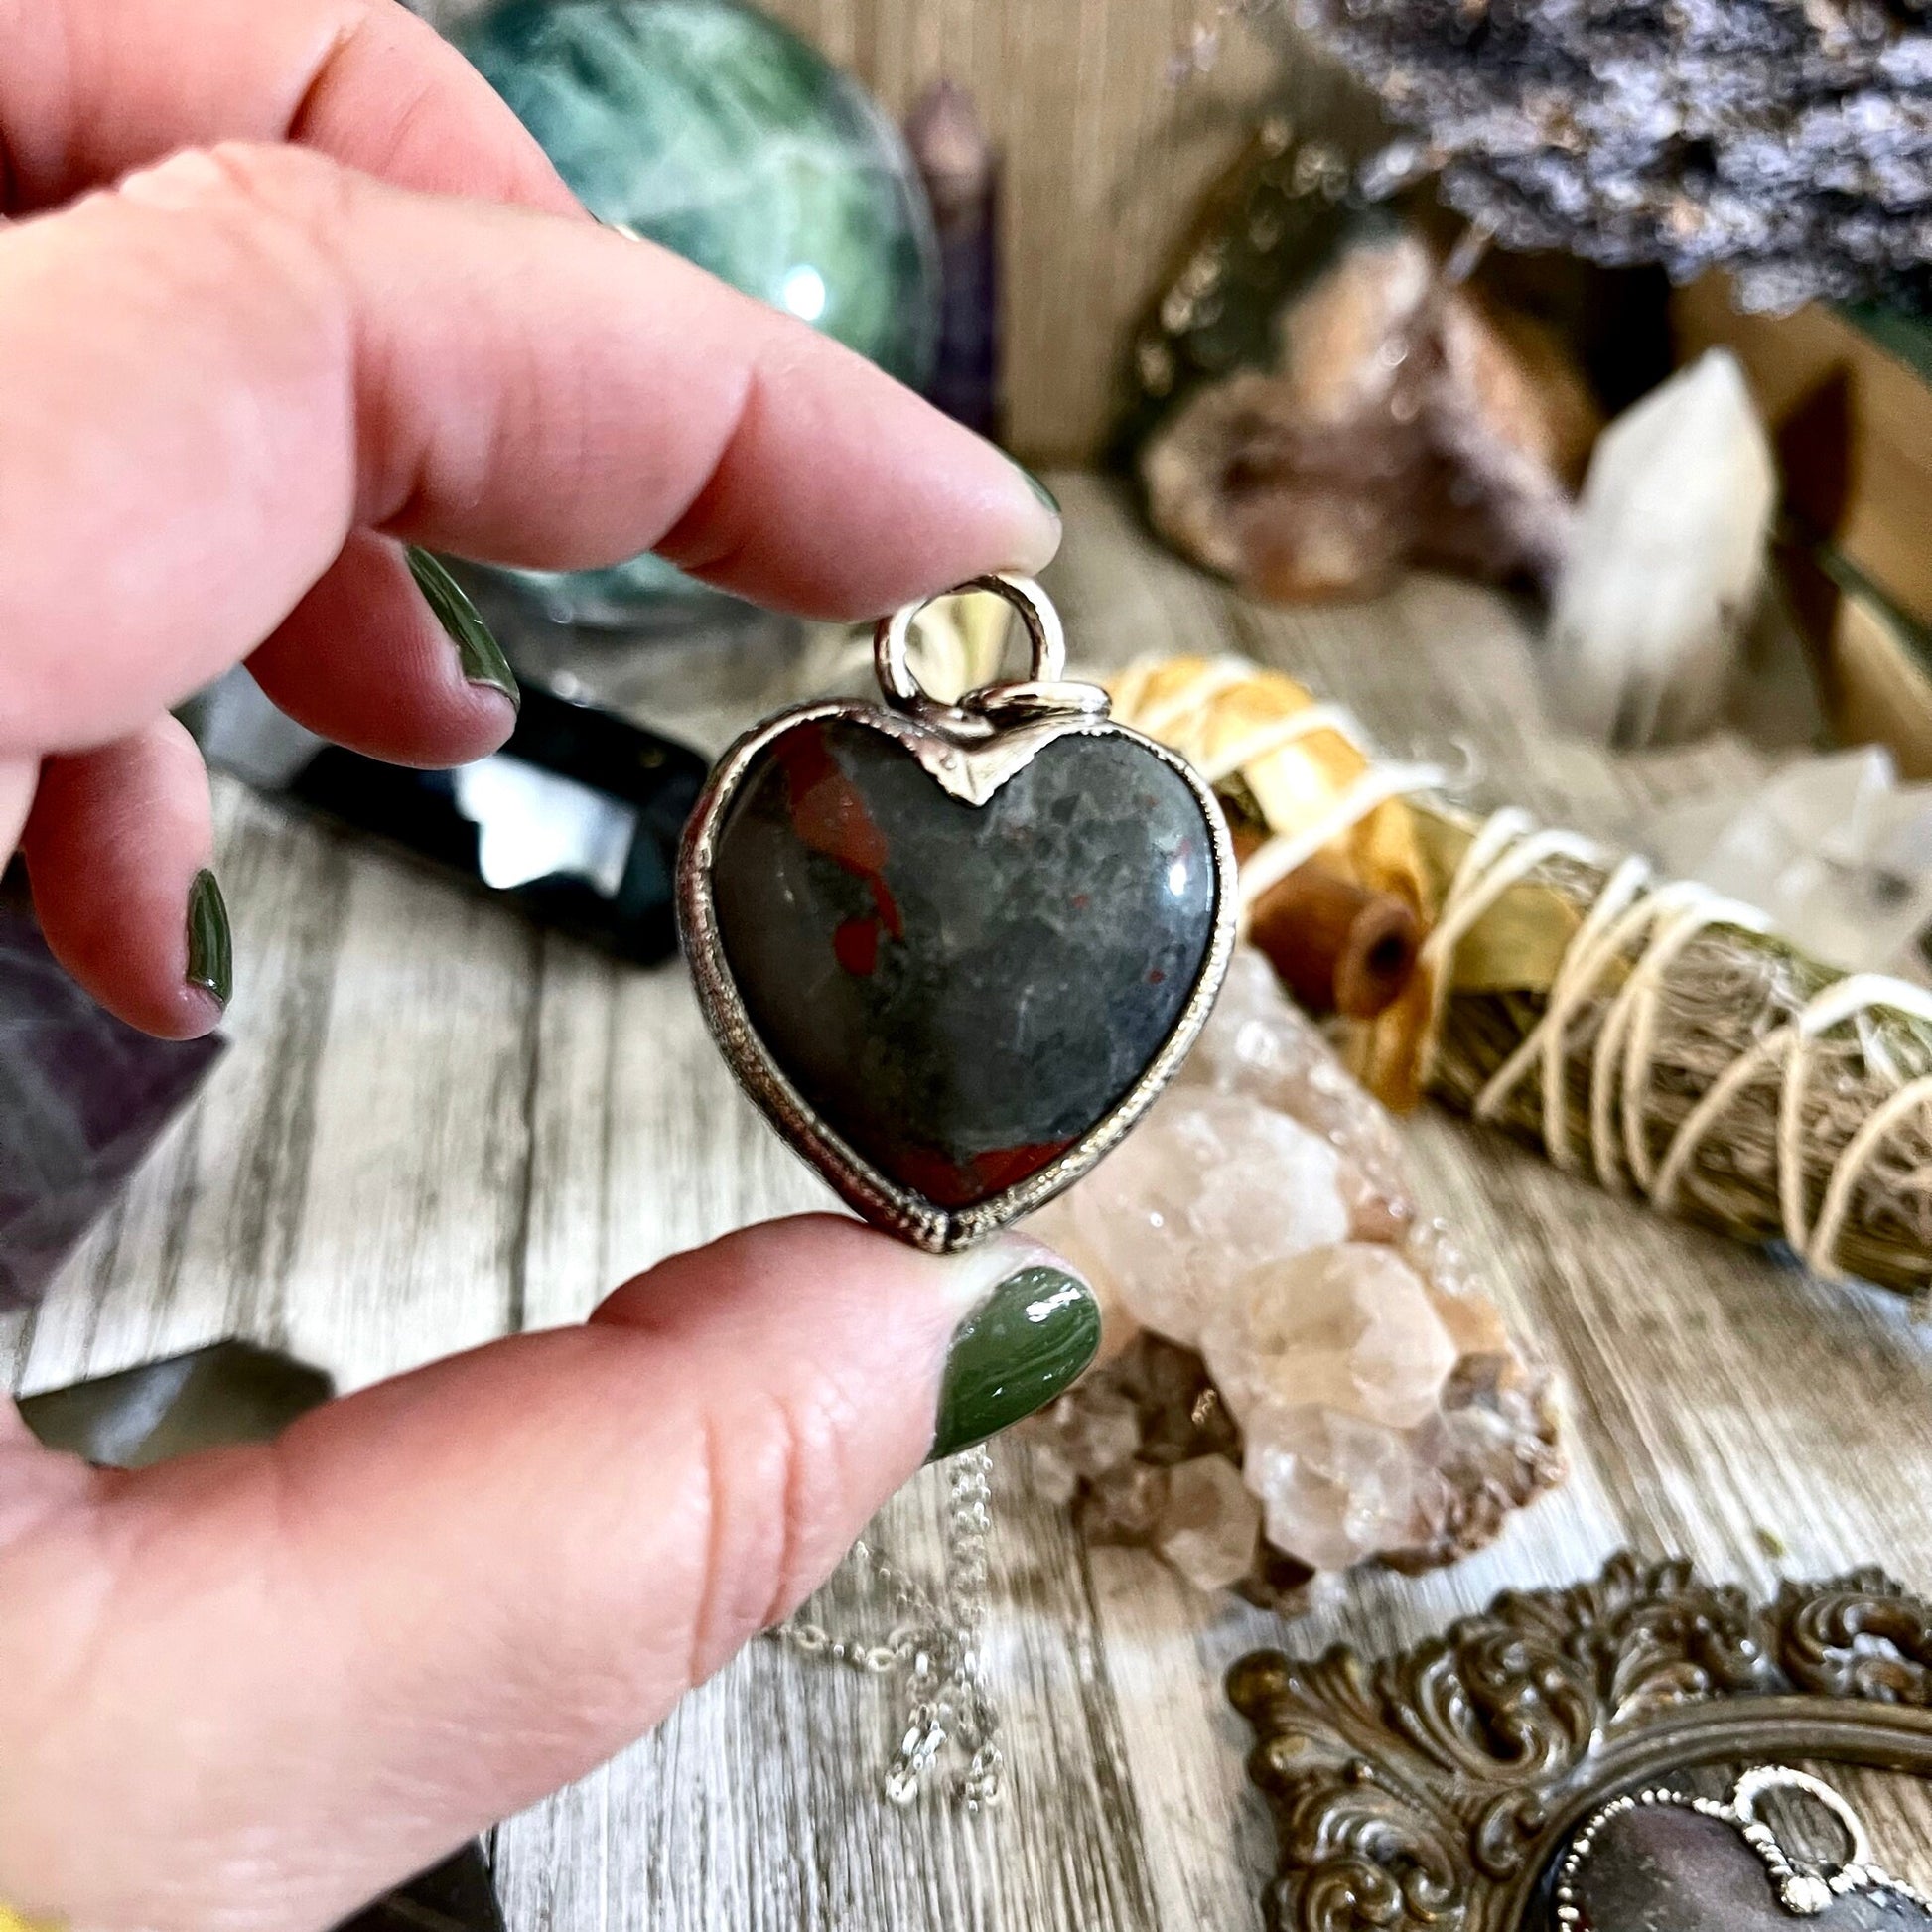 Big Heart Pendent, Bloodstone necklace, Crystal heart, Crystal Necklace, Crystal Necklaces, Crystal pendant, Etsy ID: 1659937333, FOXLARK- NECKLACES, Healing Crystal, Heart Necklace, Heart Pendant, Heart Shaped Locket, Jewelry, Necklaces, Silver Jewelry,